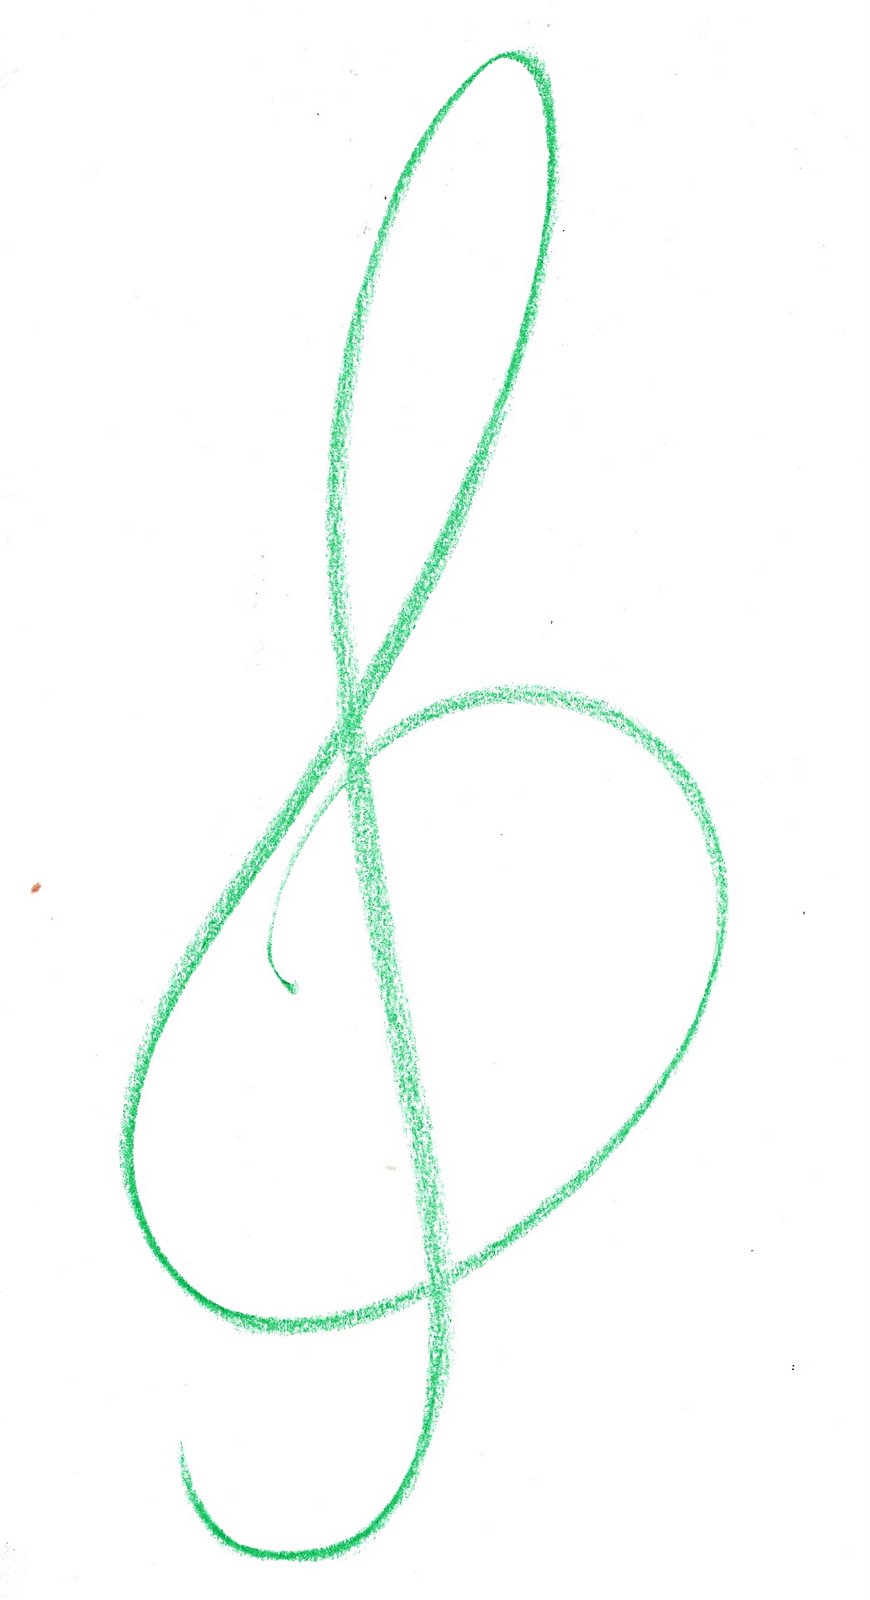 Drawing Of A Treble Clef - ClipArt Best